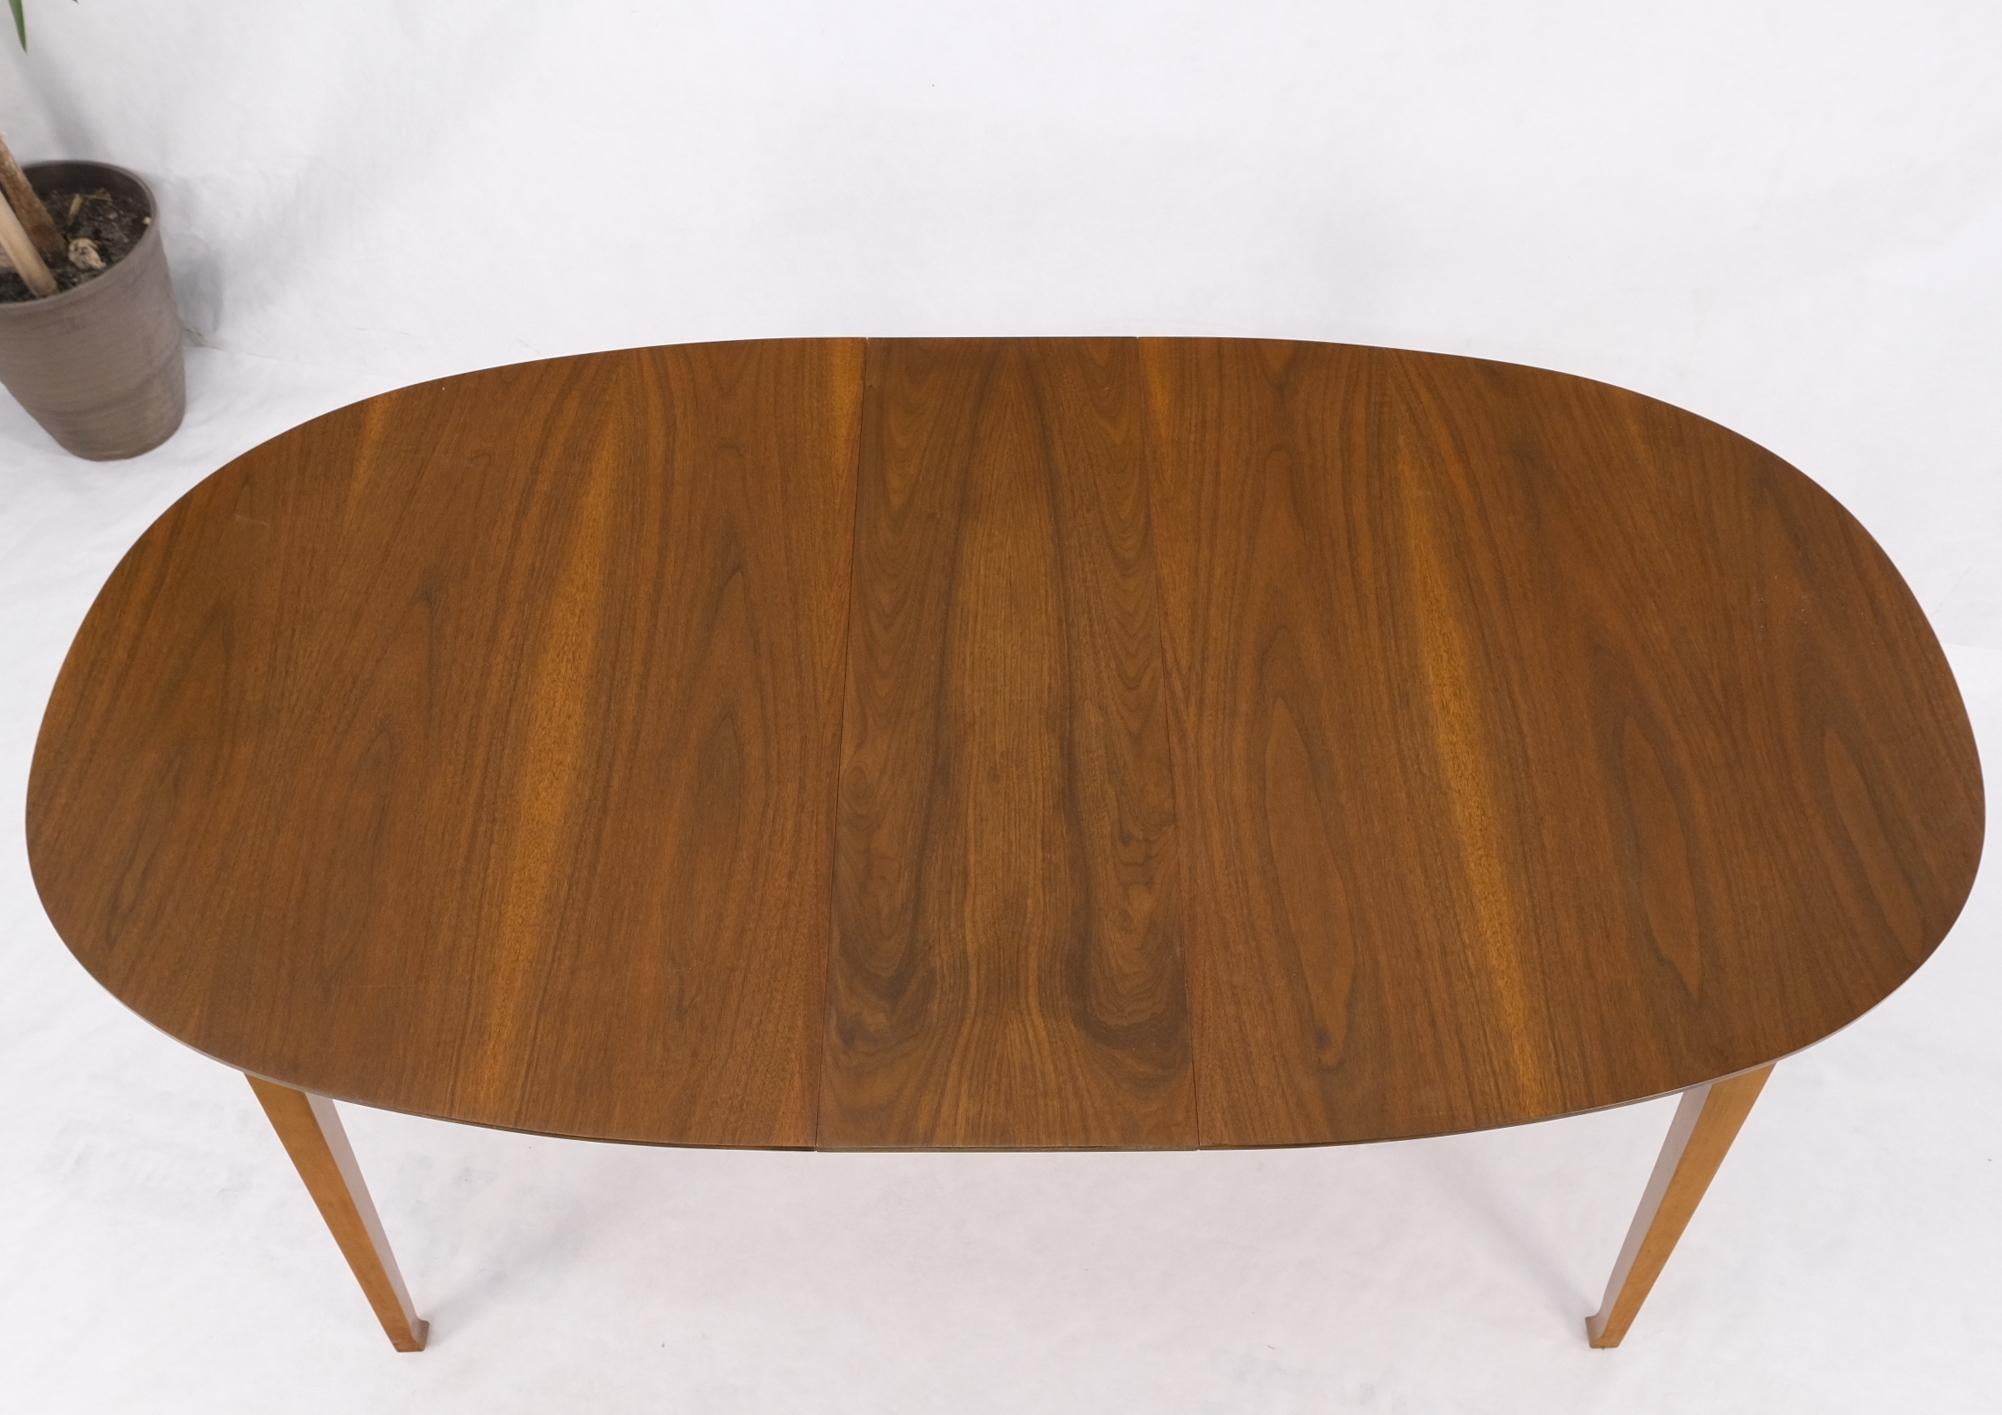 Oval Walnut Square Tapered Legs Mid Century Modern Dining Conference Table Mint For Sale 1